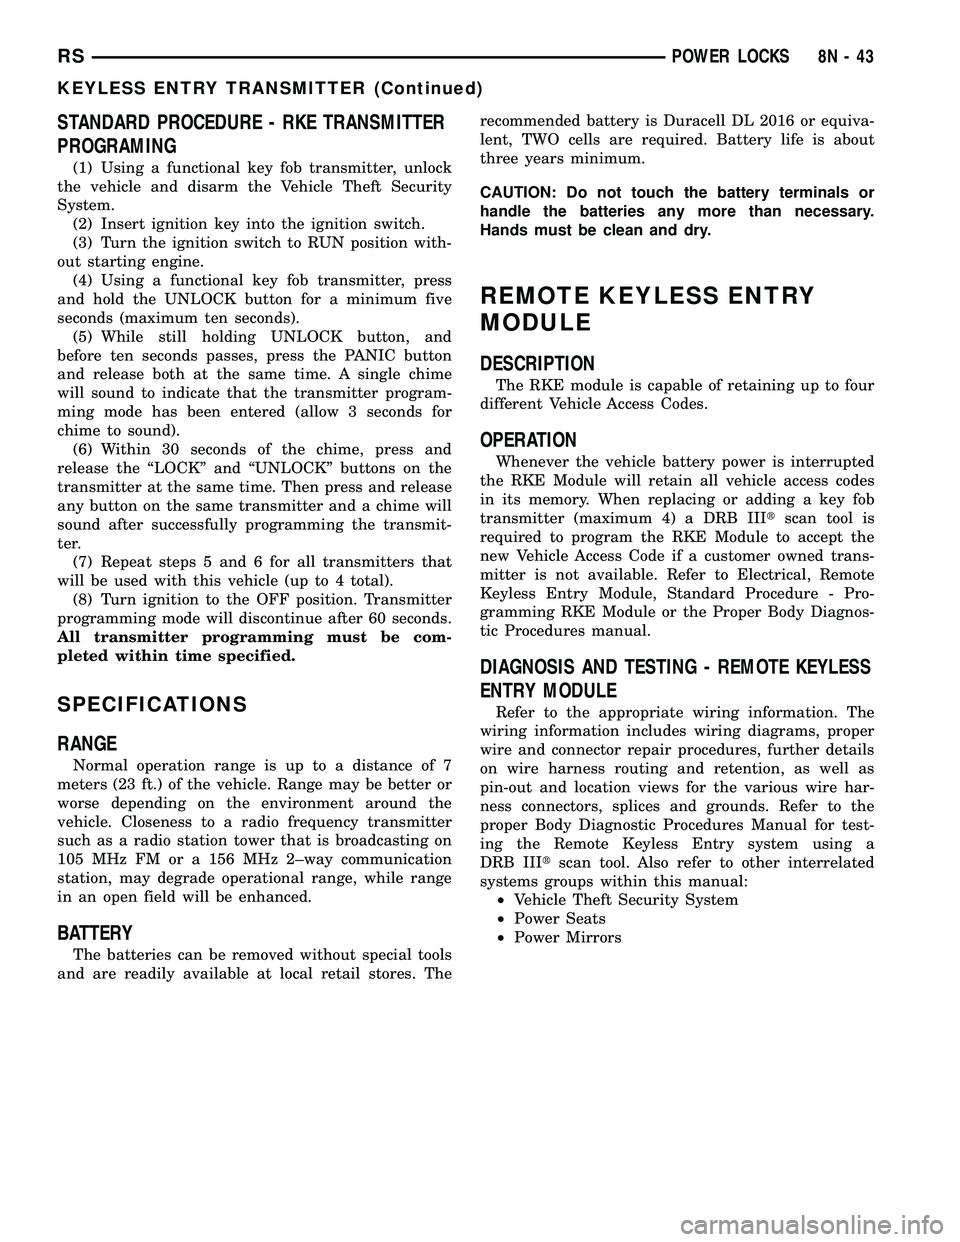 CHRYSLER VOYAGER 2004  Service Manual STANDARD PROCEDURE - RKE TRANSMITTER
PROGRAMING
(1) Using a functional key fob transmitter, unlock
the vehicle and disarm the Vehicle Theft Security
System.
(2) Insert ignition key into the ignition s